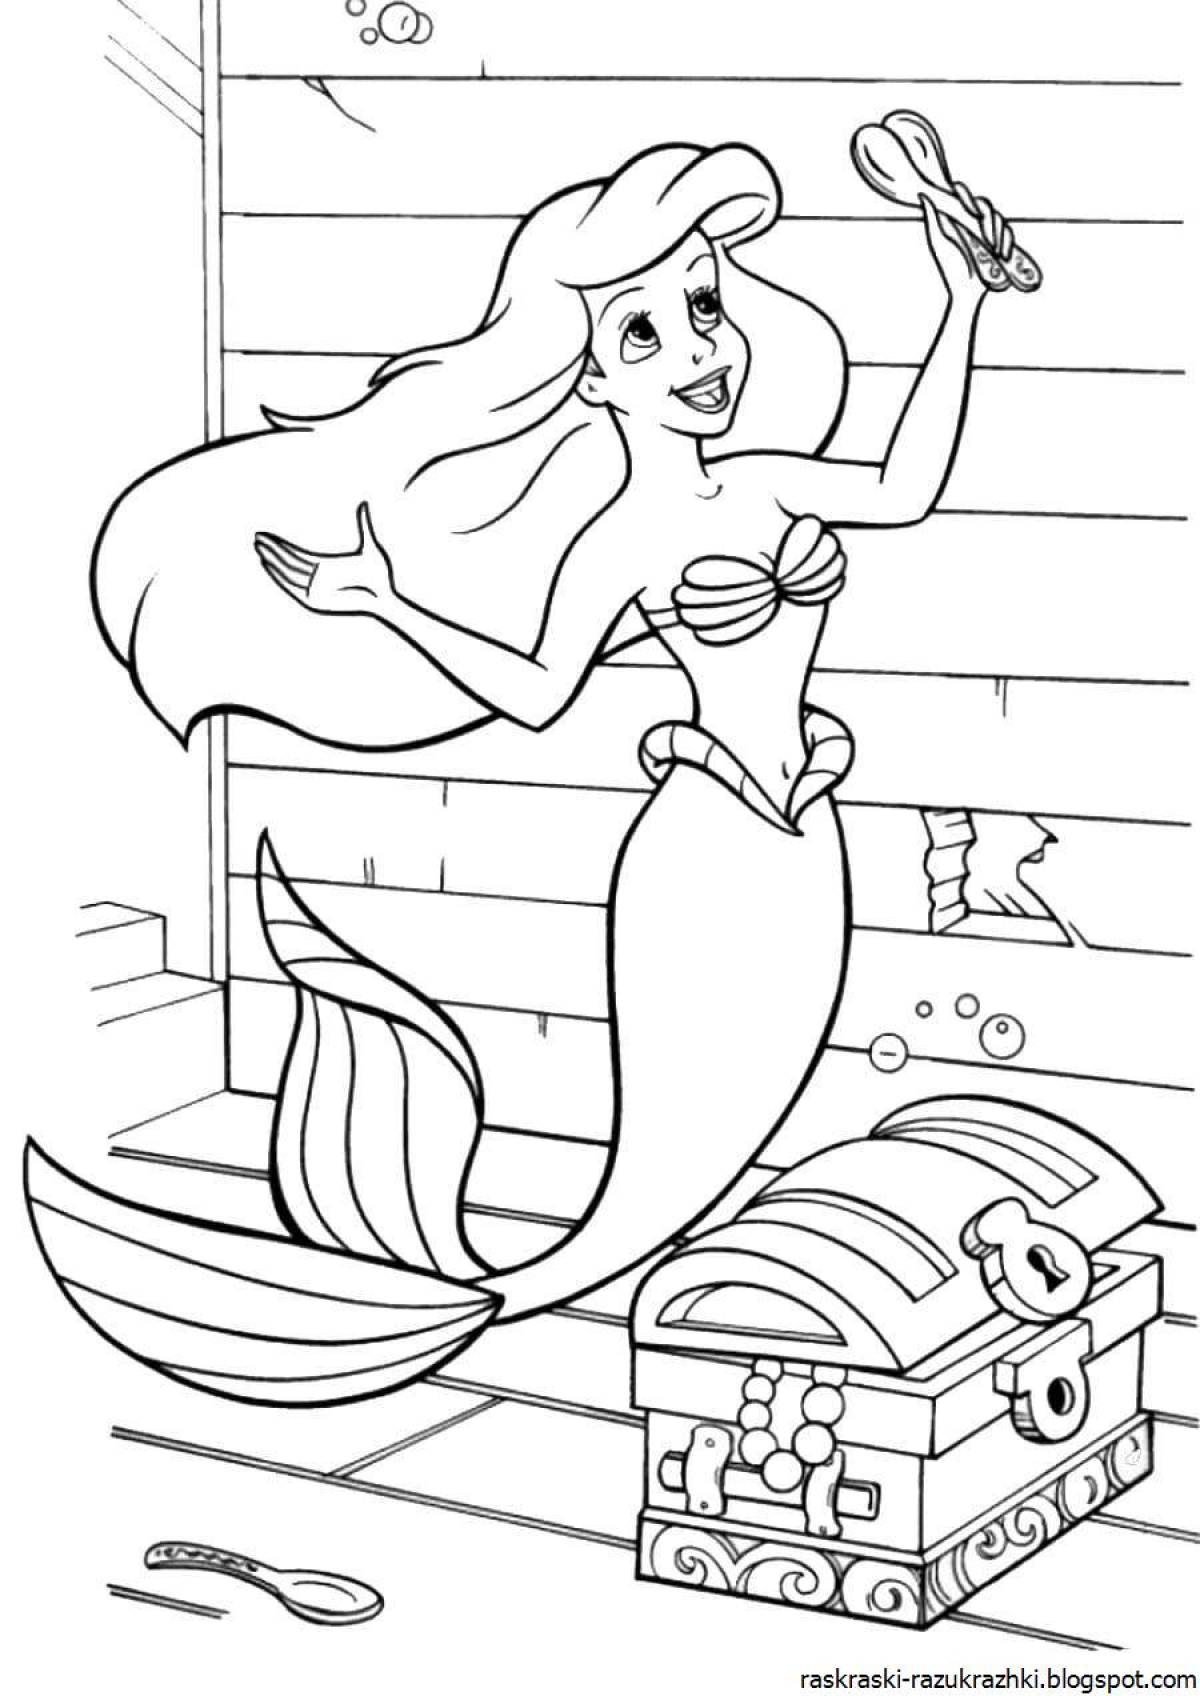 Dazzling little mermaid coloring book for kids